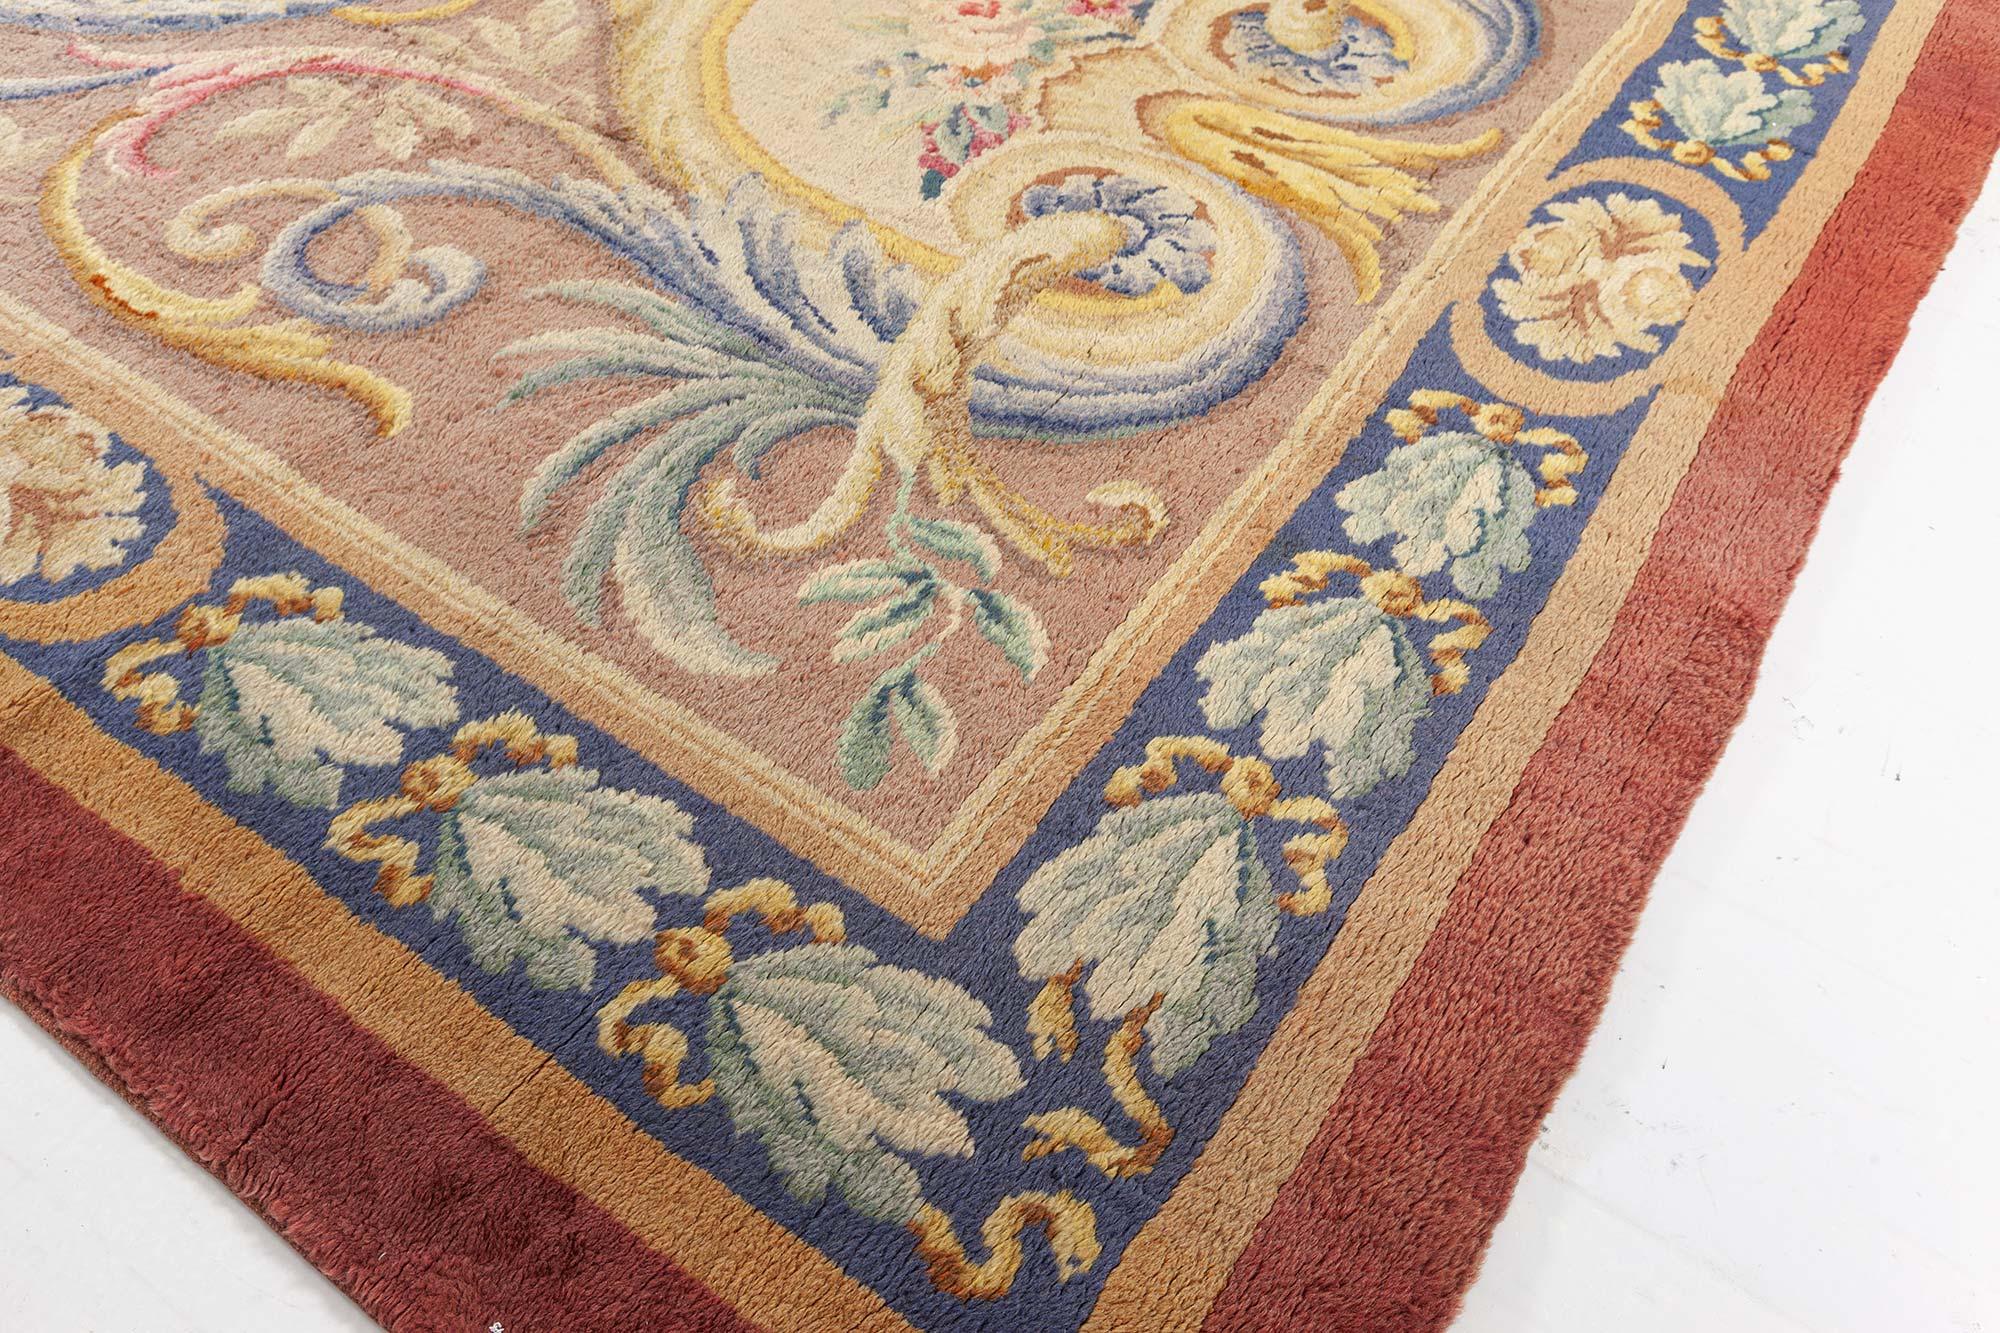 Early 20th Century Classic French Savonnerie Rug In Good Condition For Sale In New York, NY